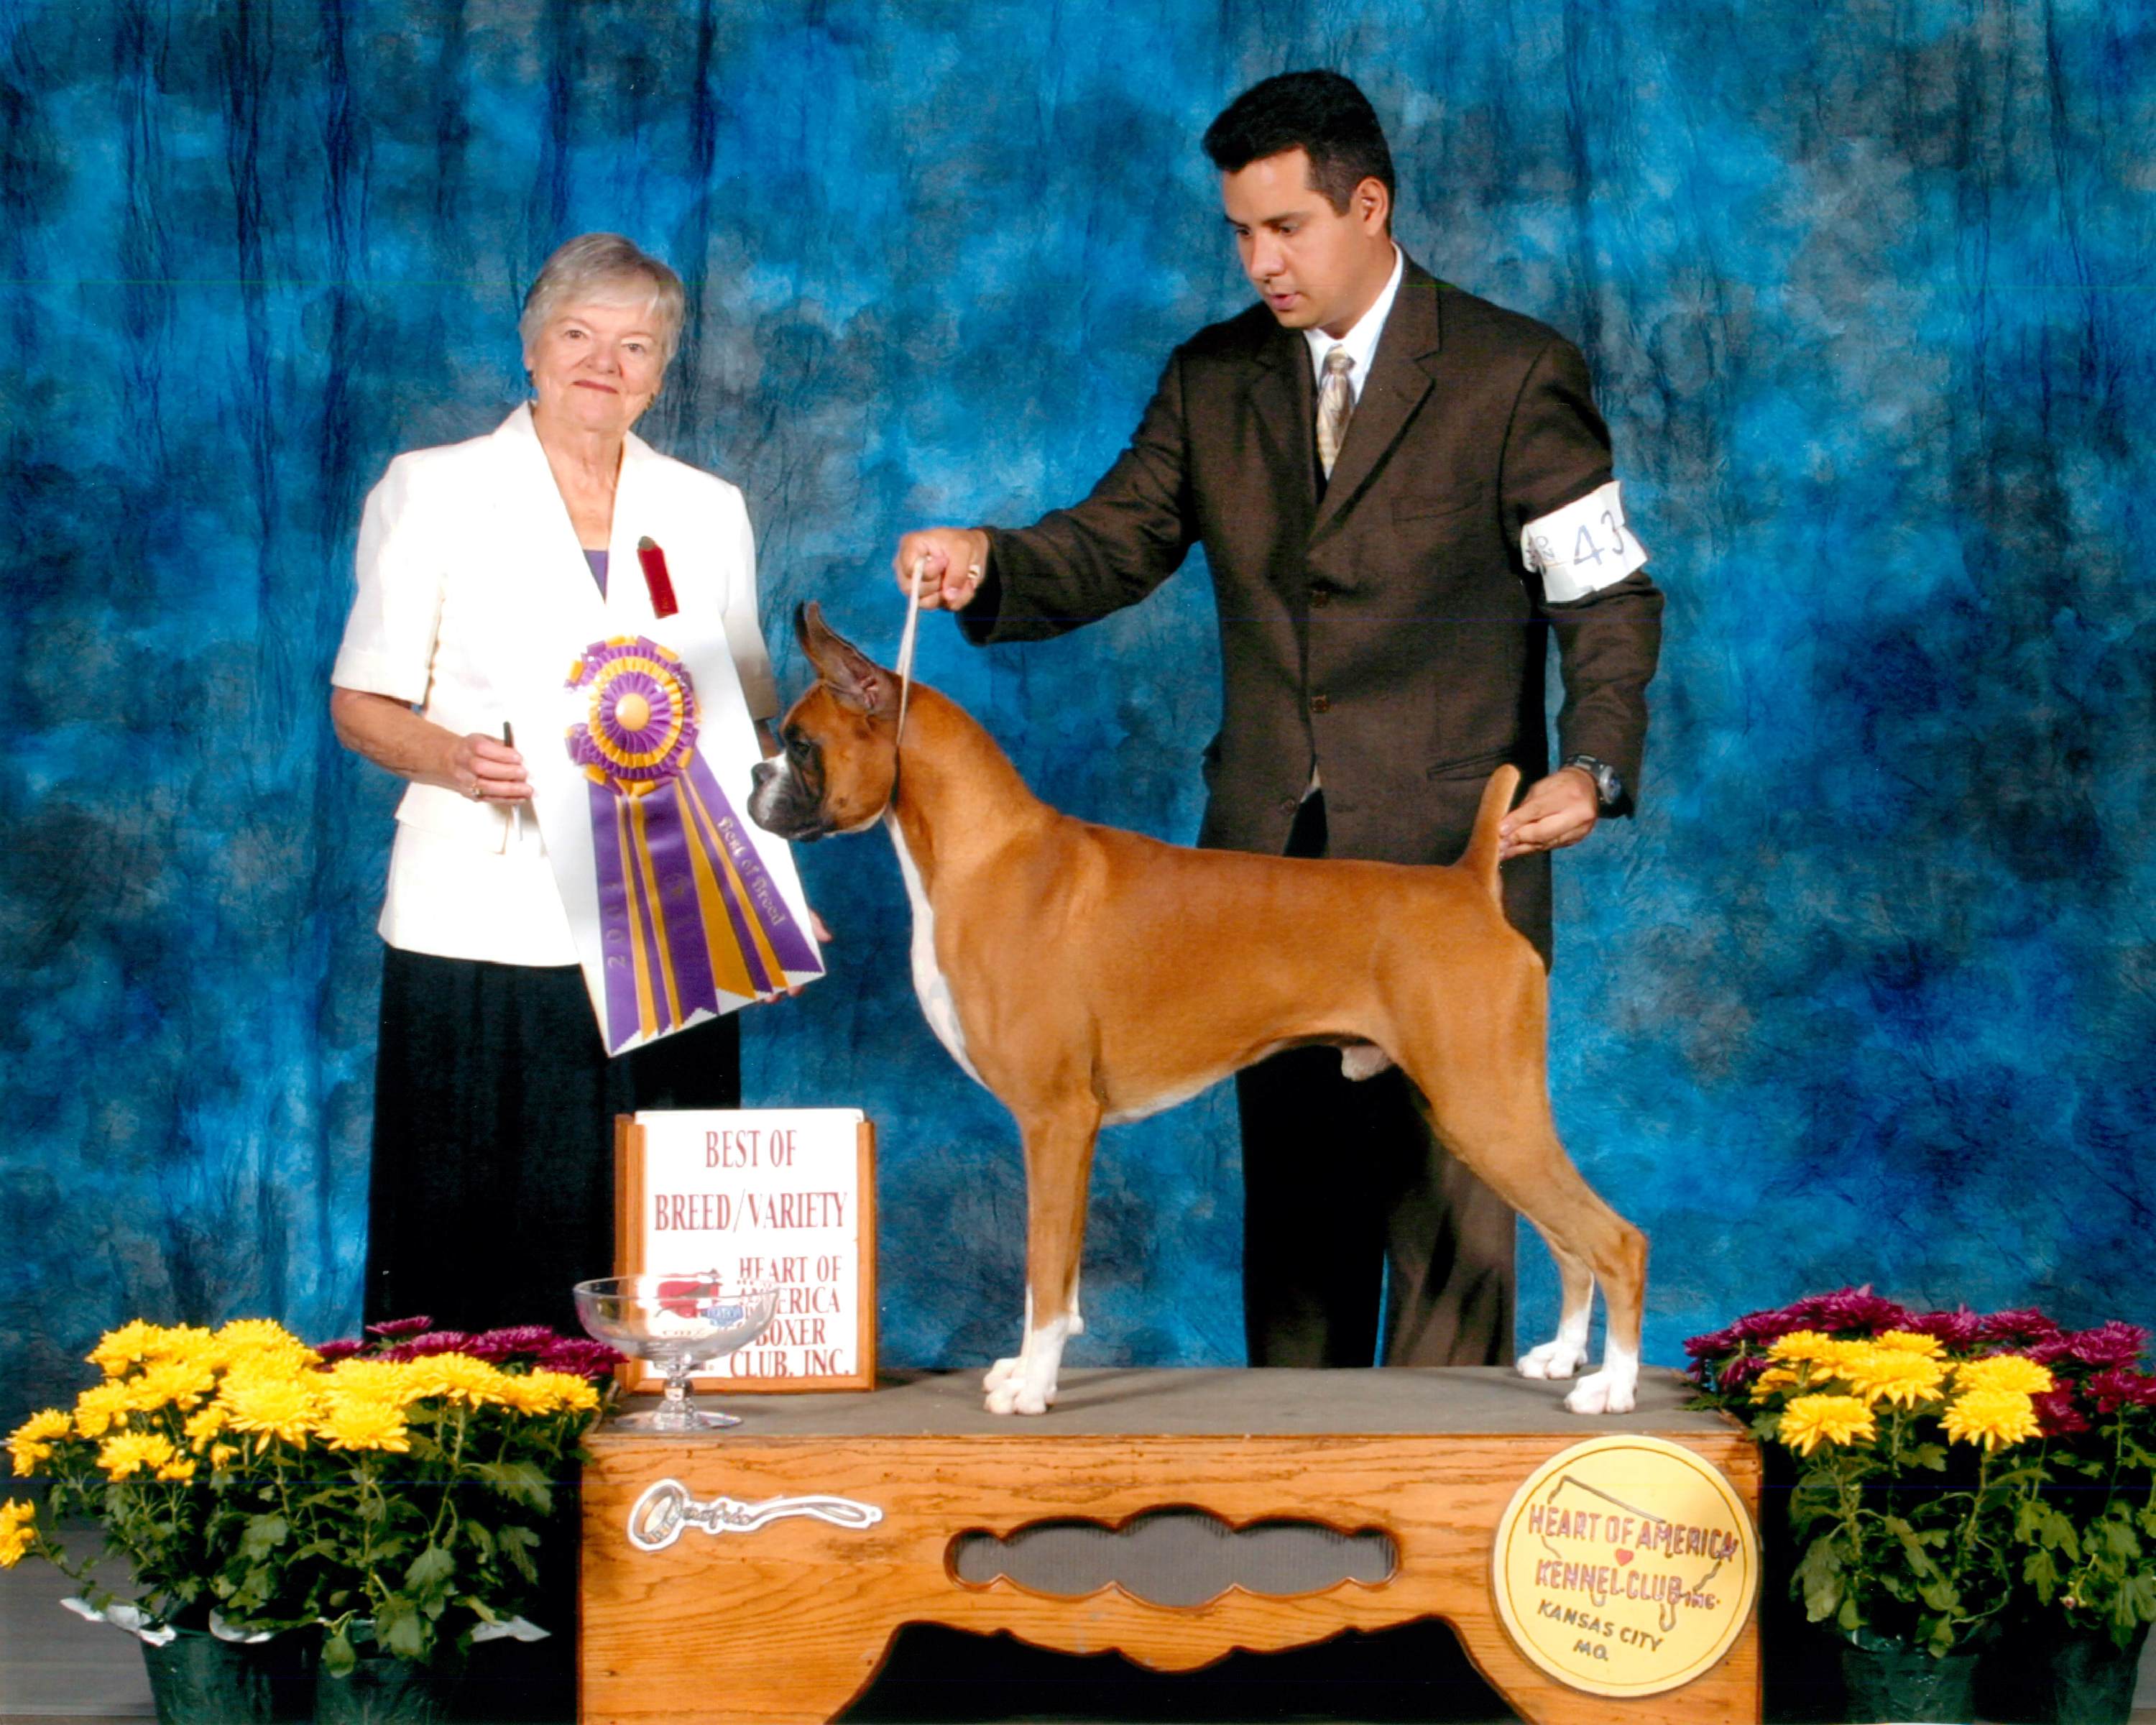 Best of Breed @ 2003 Specialty Show #2